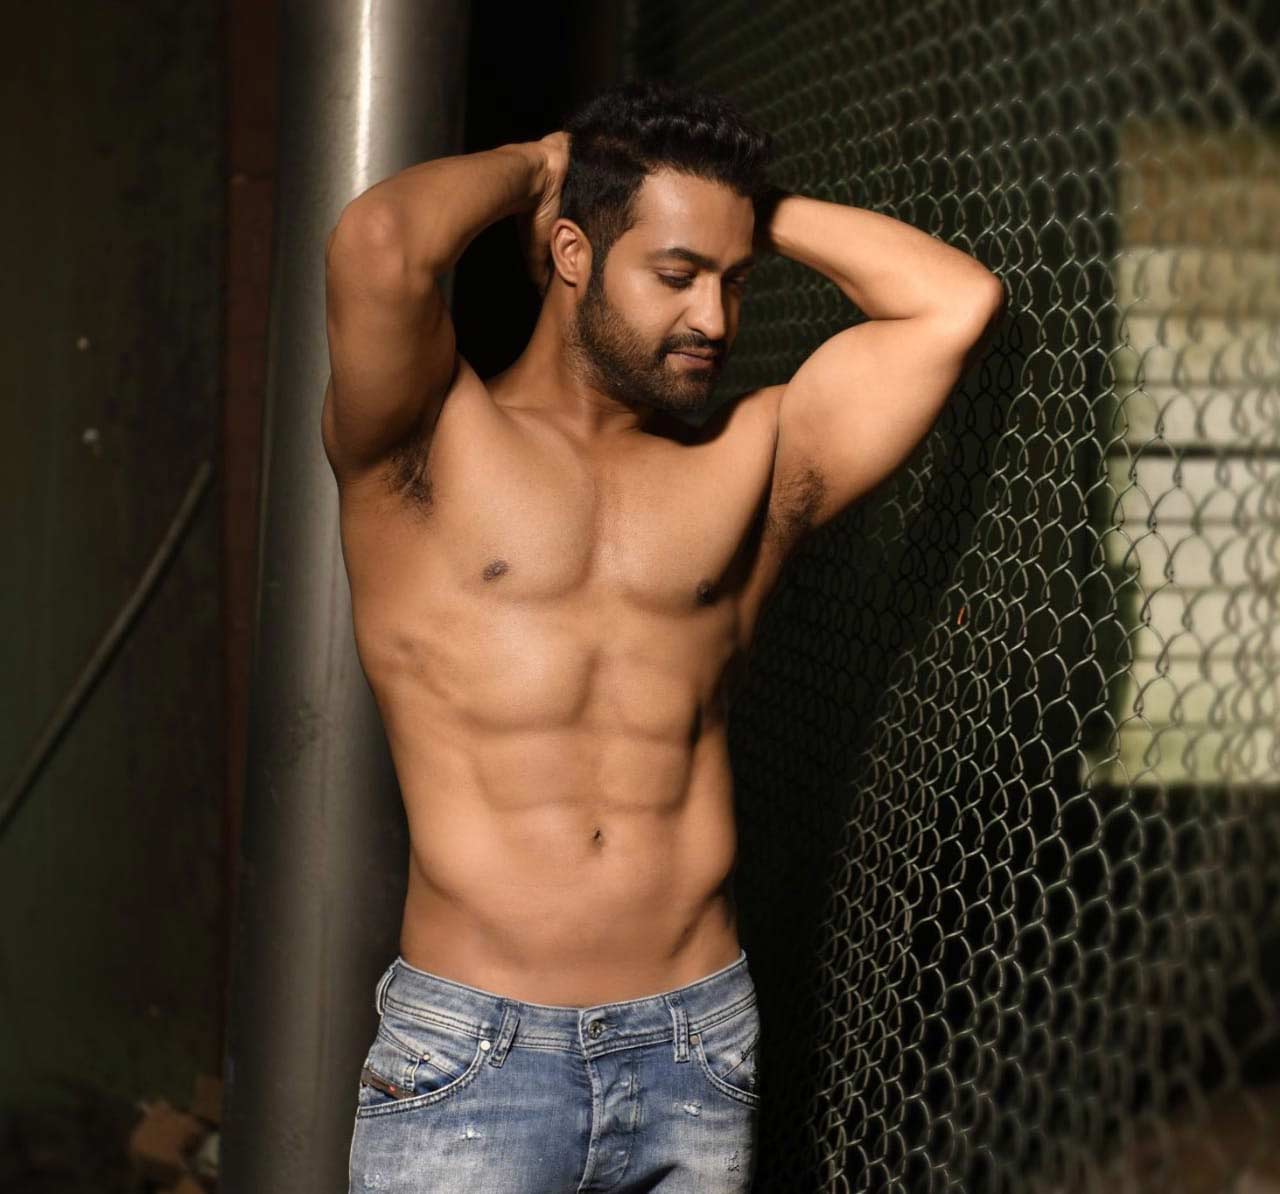 NTR to go bare chested in War2